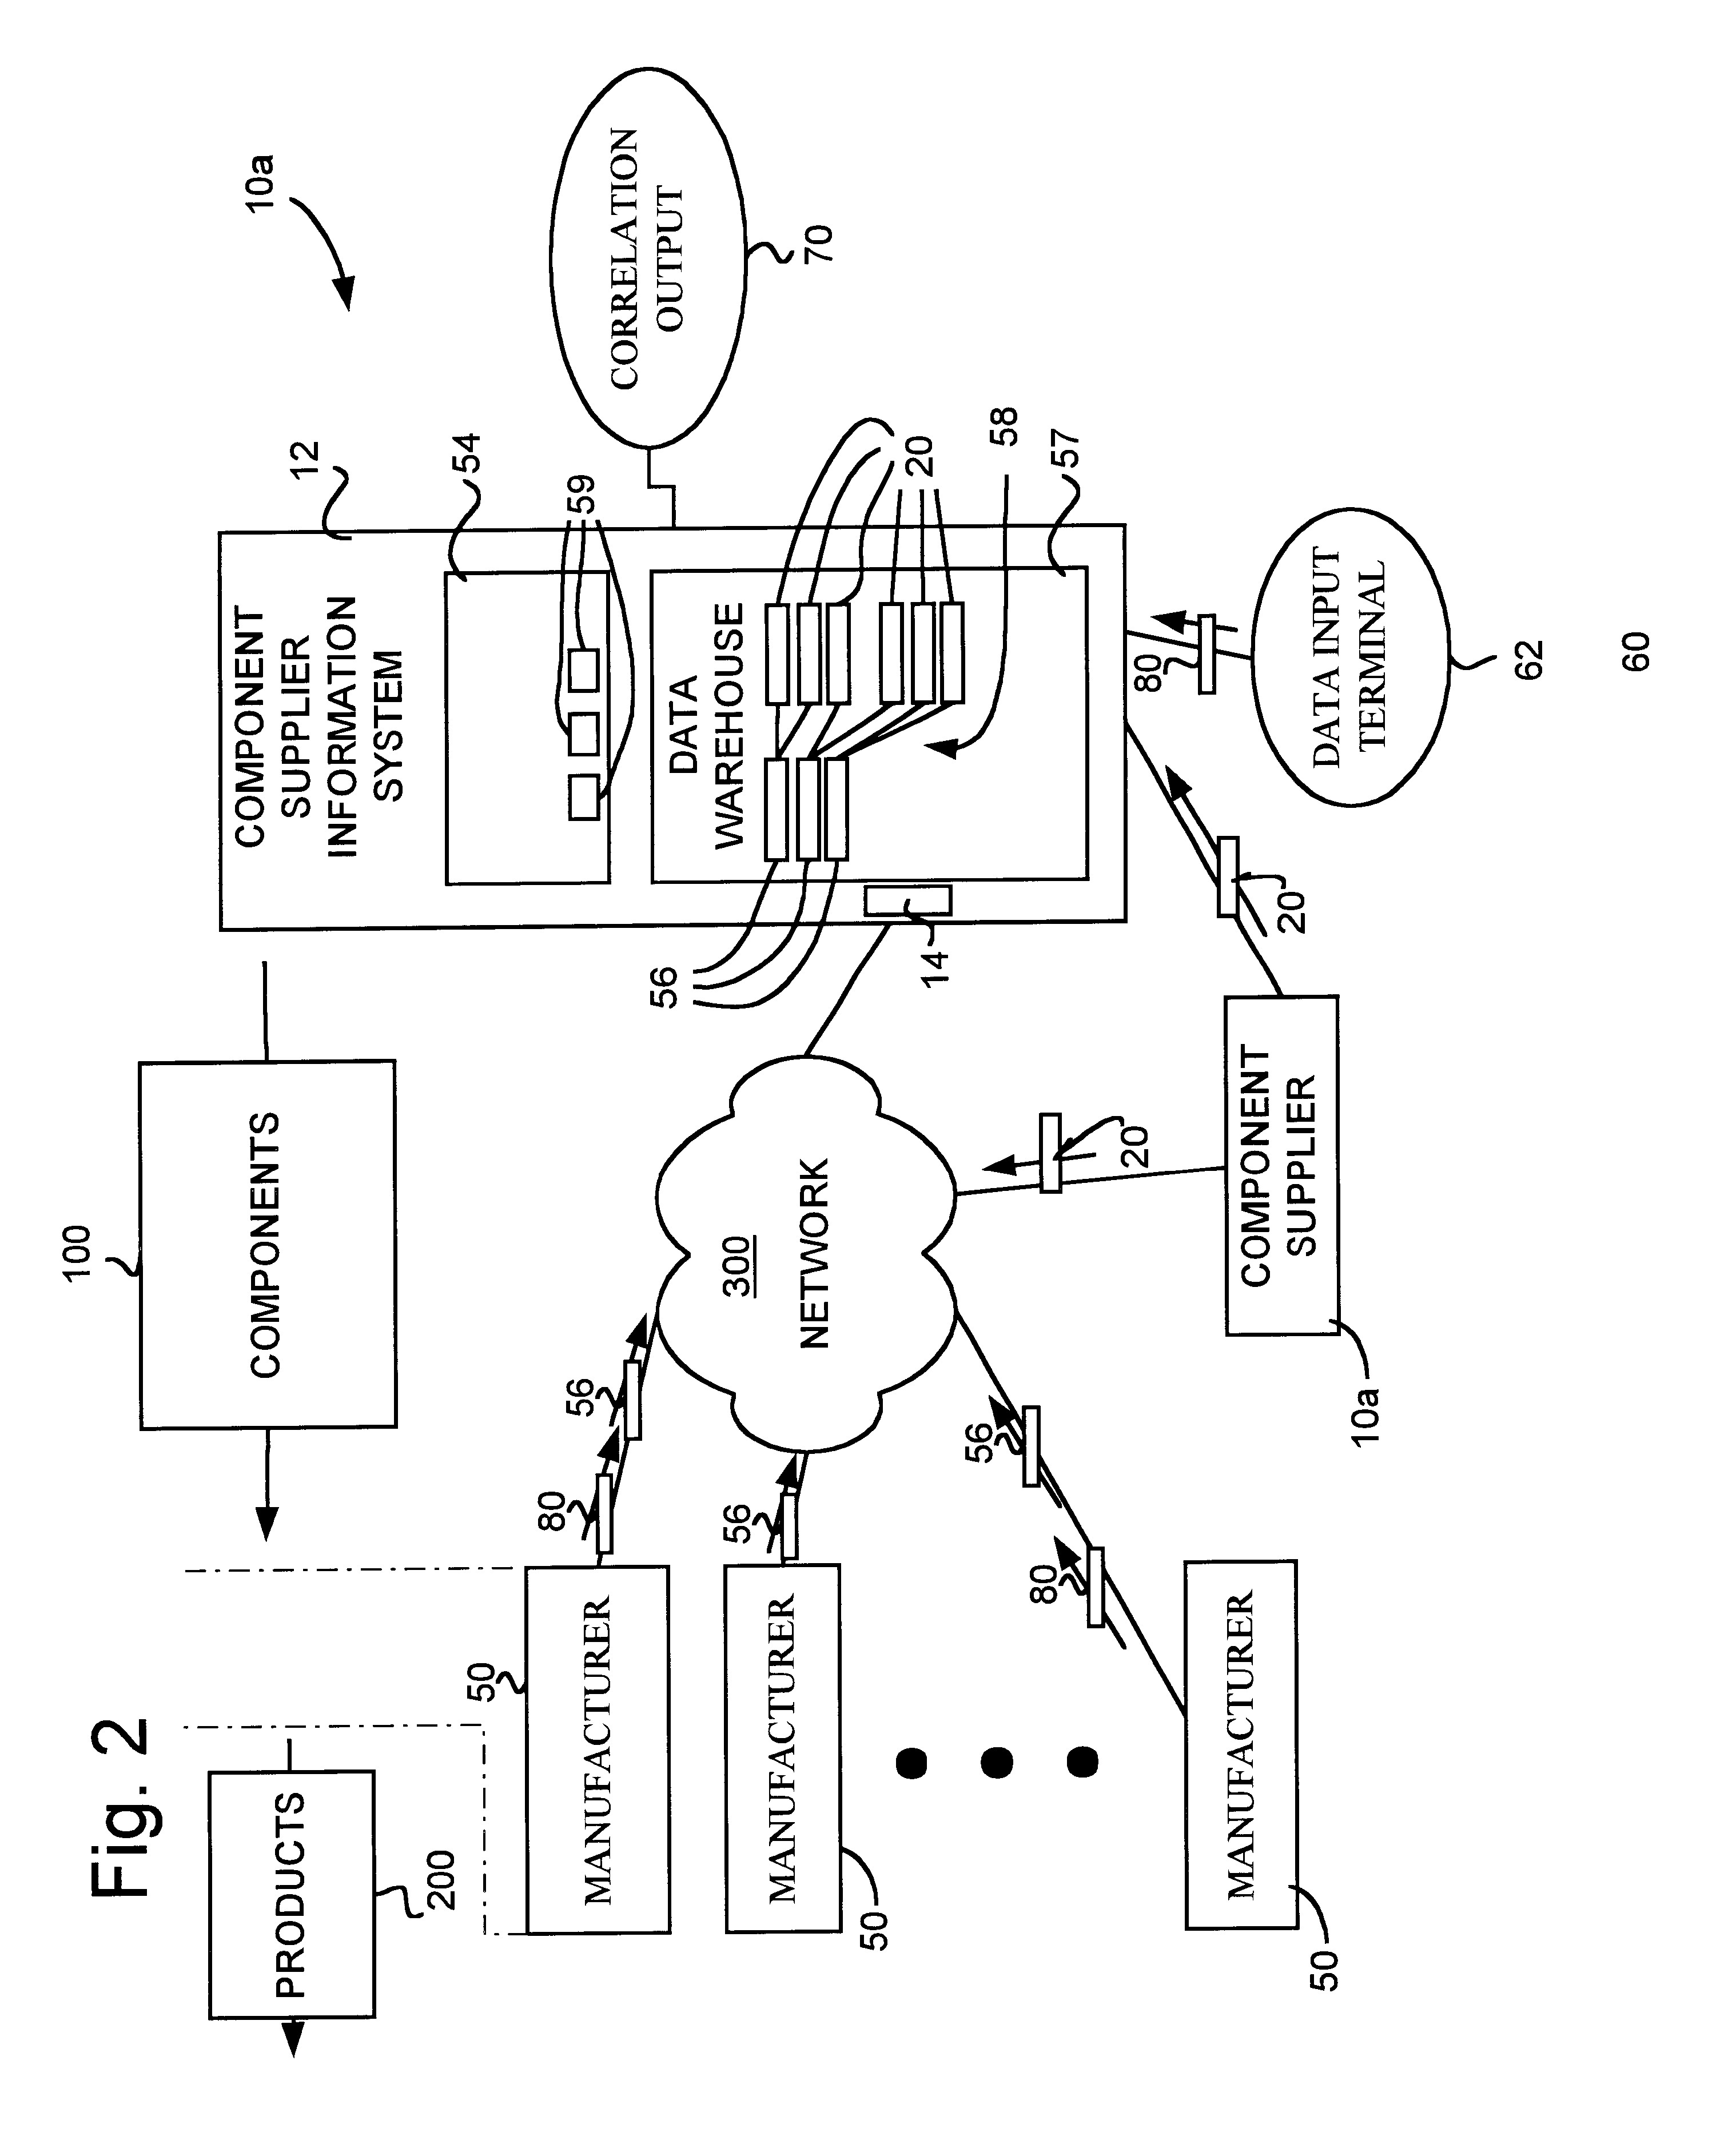 Method using statistically analyzed product test data to control component manufacturing process